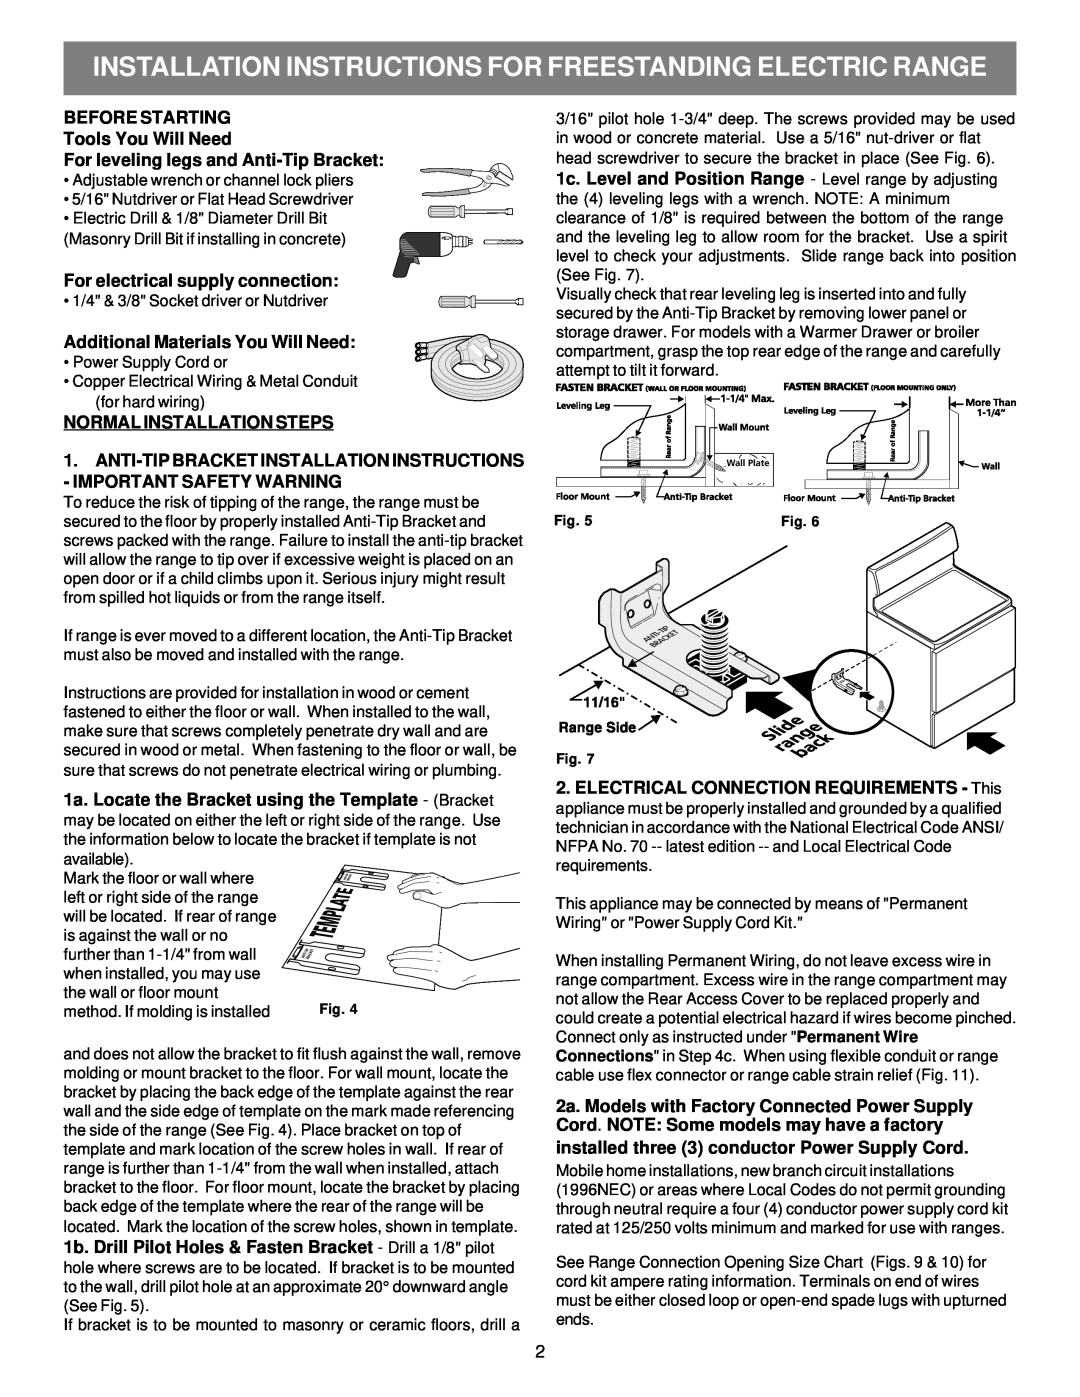 Electrolux 316454909 installation instructions BEFORE STARTING Tools You Will Need, For leveling legs and Anti-Tip Bracket 